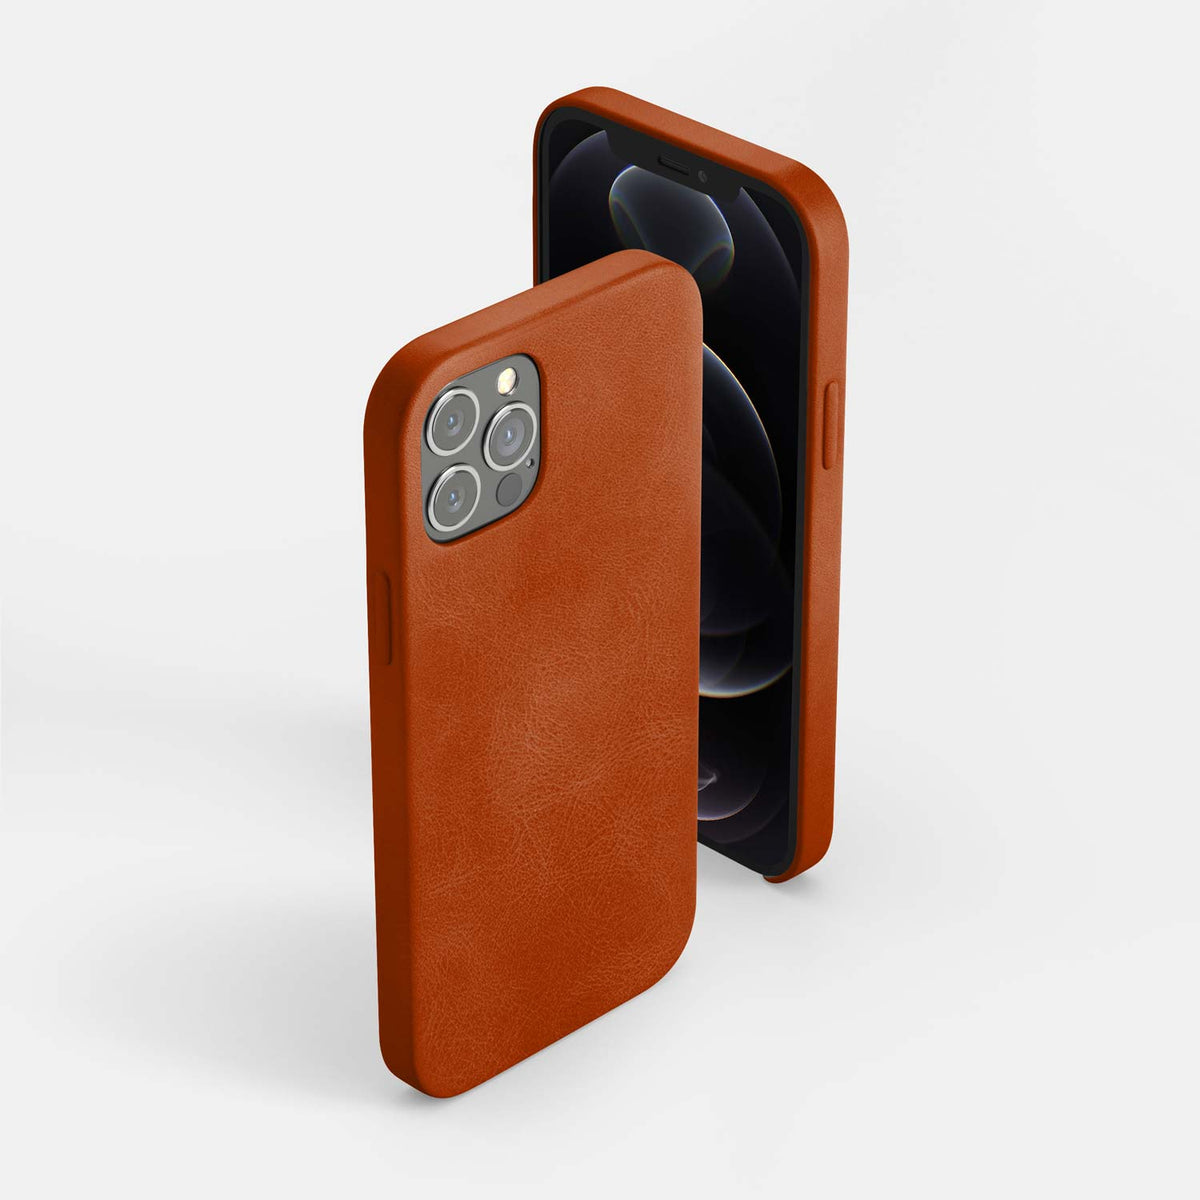 Leather iPhone 12 Pro Shell Case - Saddle Brown - RYAN London